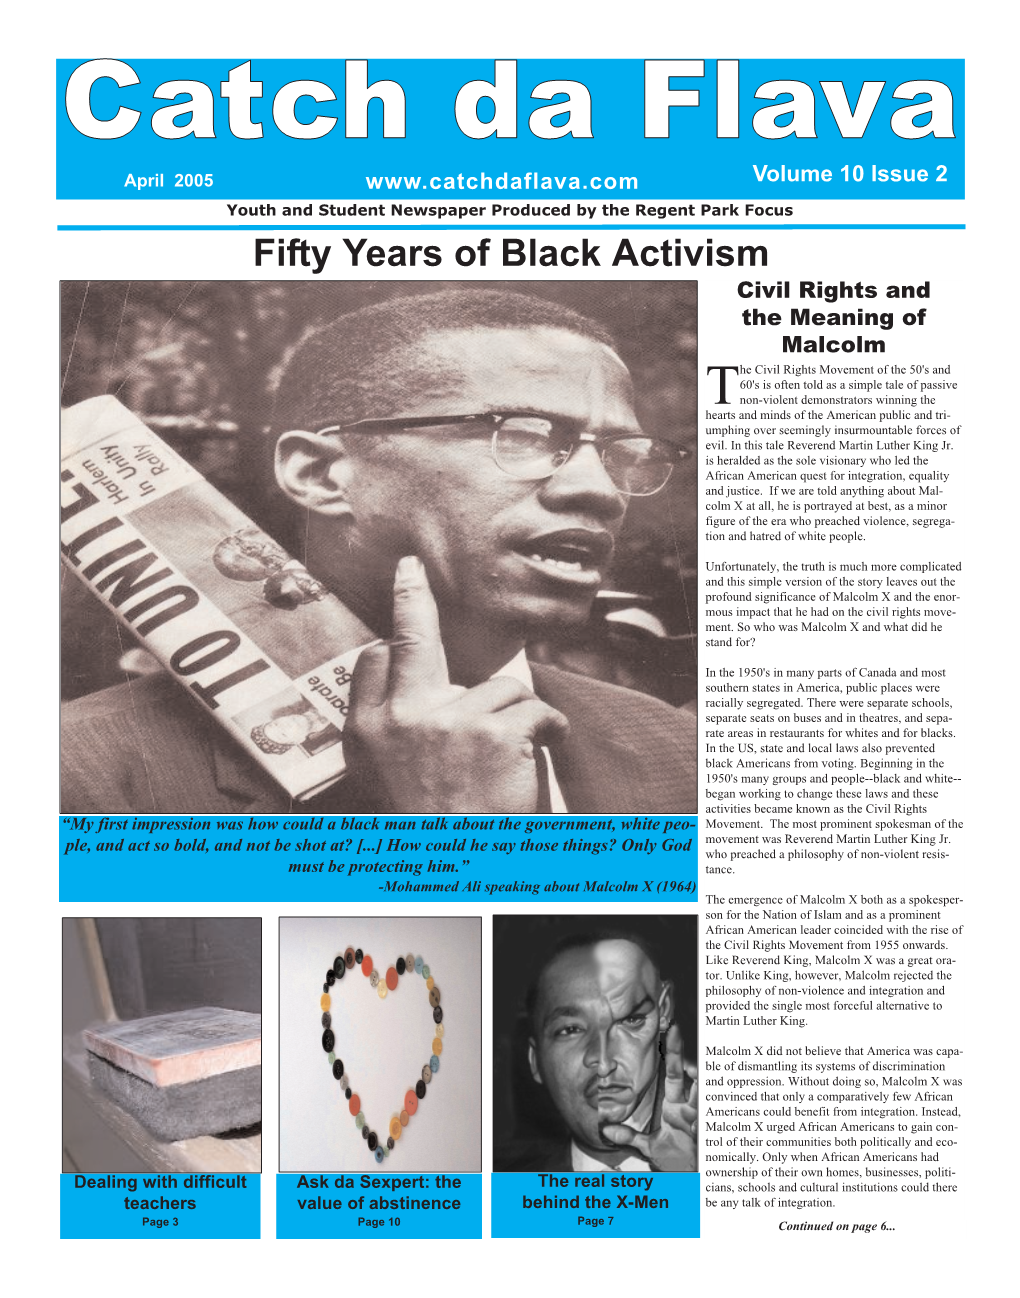 Fifty Years of Black Activism